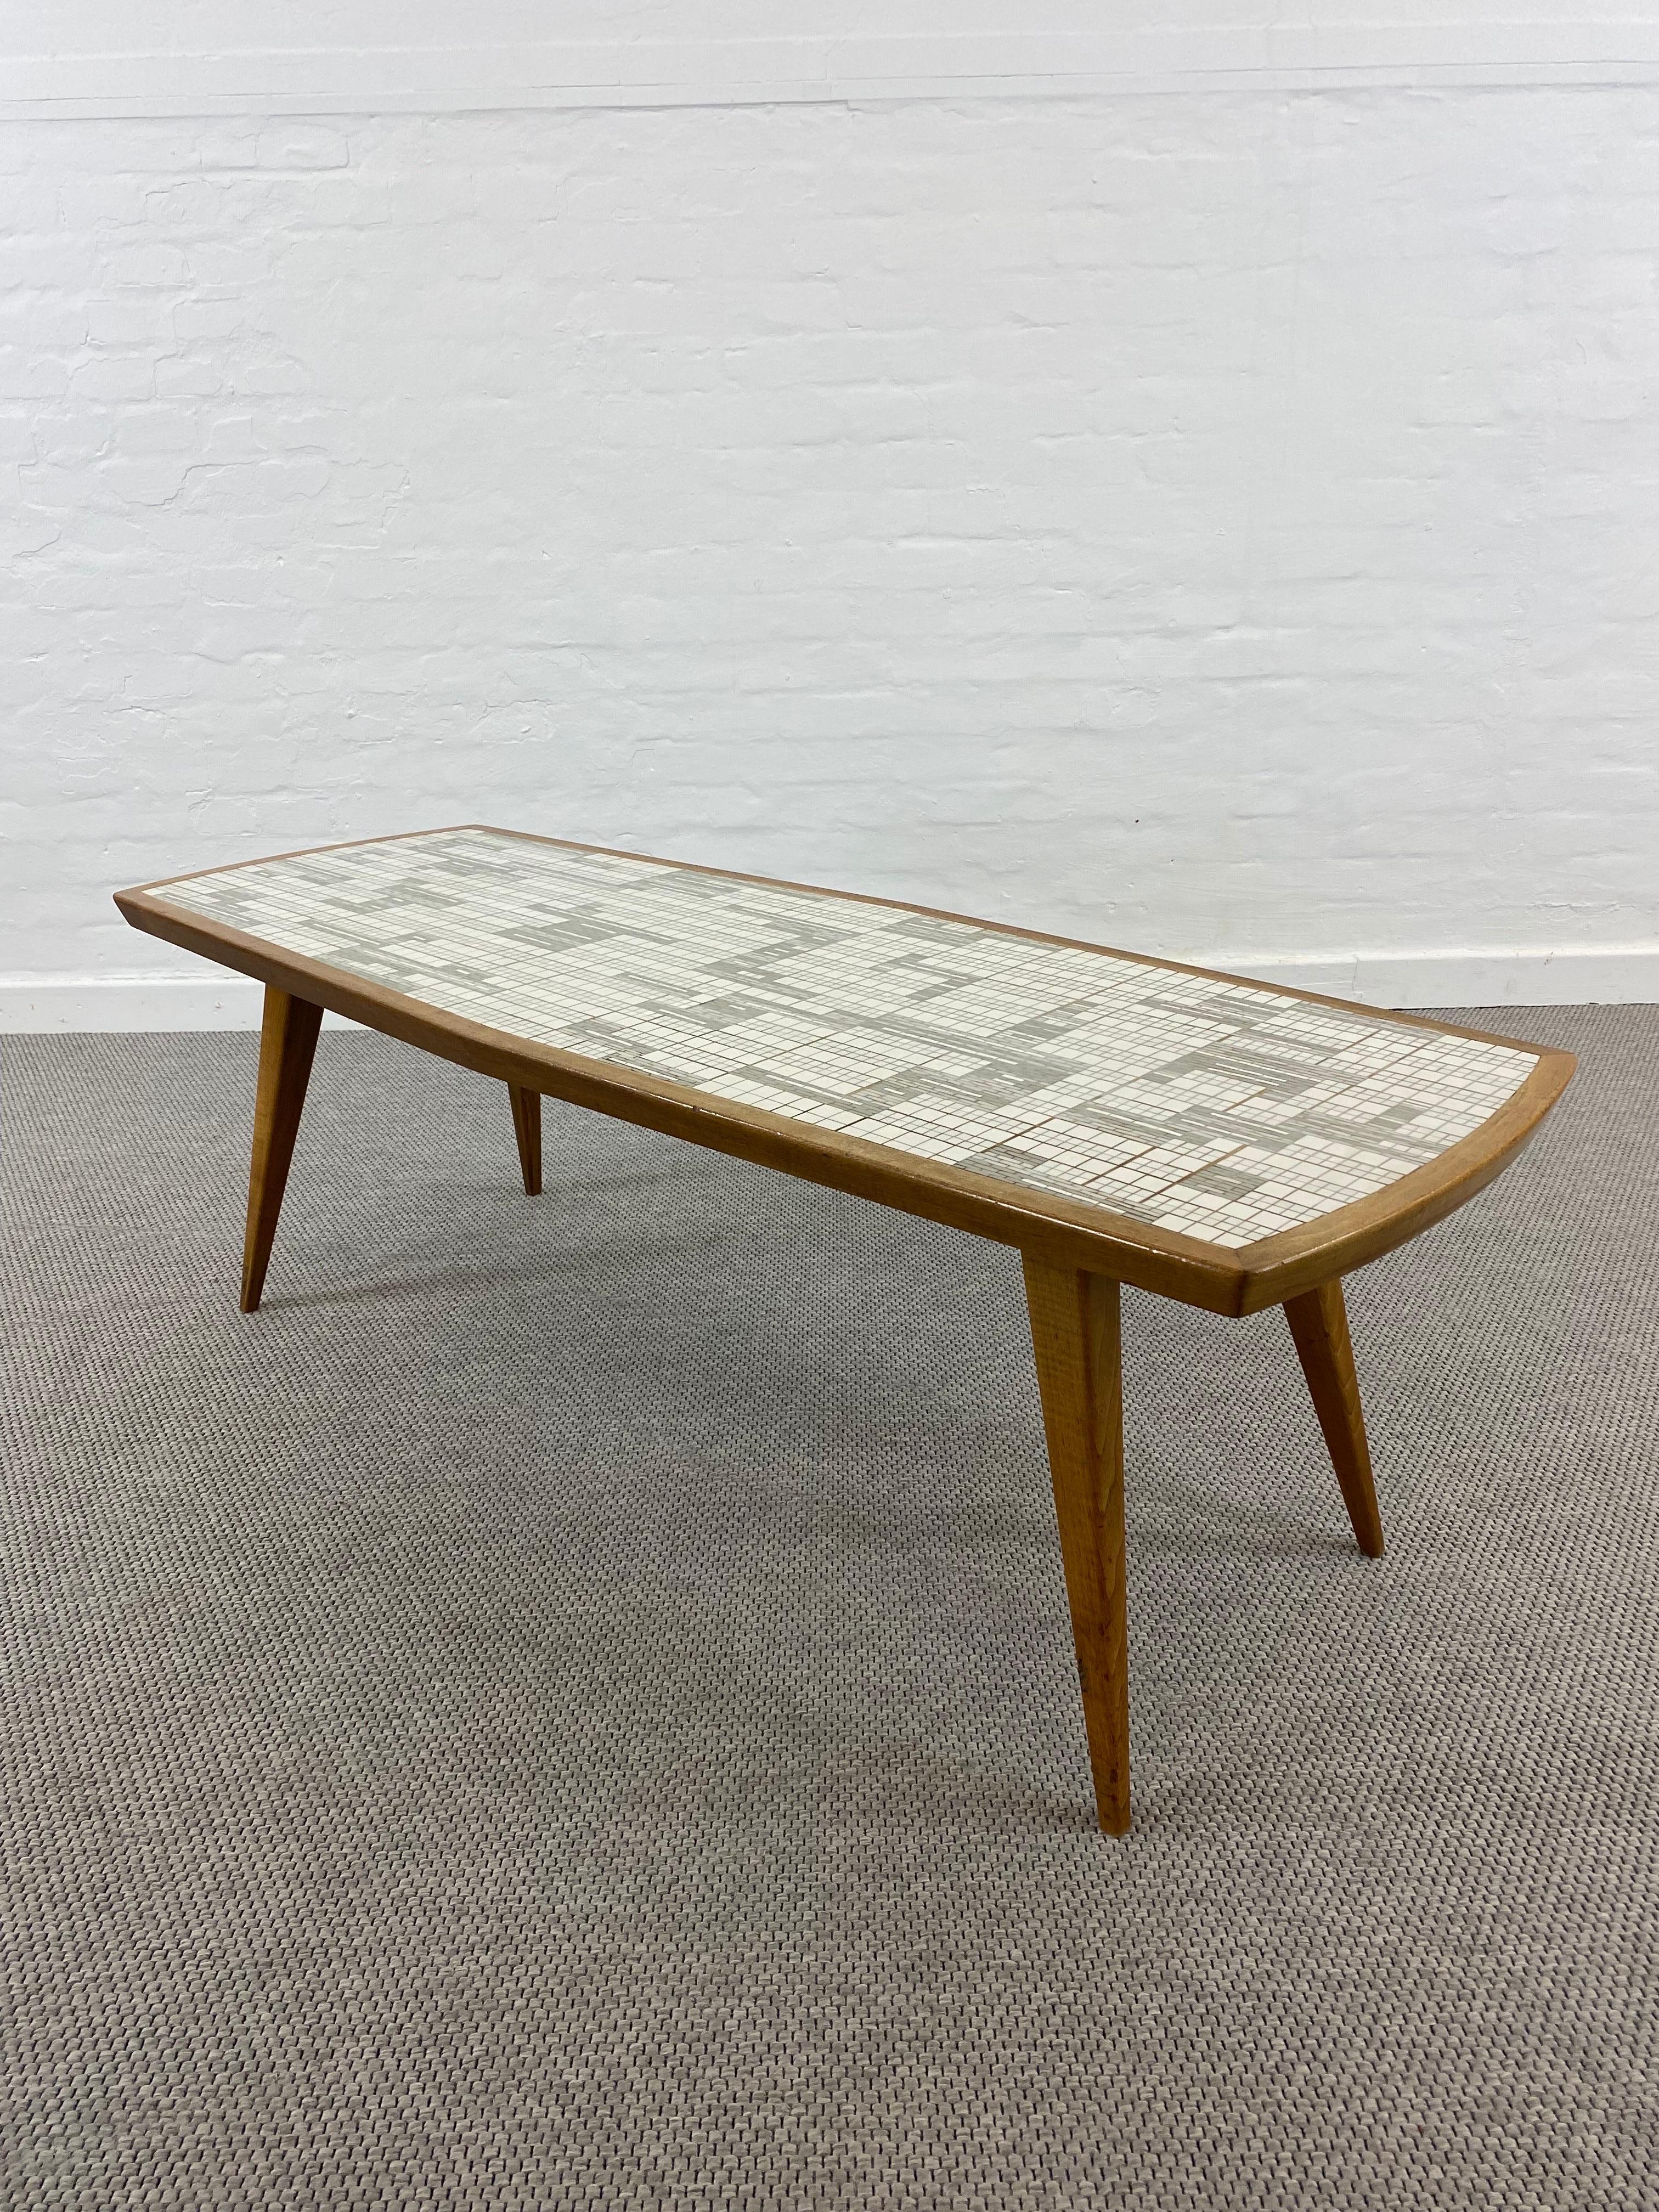 A 1950s Glas-Mosaic table by German Artist Berthold Muller-Oerlighausen (1893-1979).
The rectangular wooden base or structure of this iconic midcentury furniture is also stabile and elegant.
The glas tiles inlay give this table a modern look and